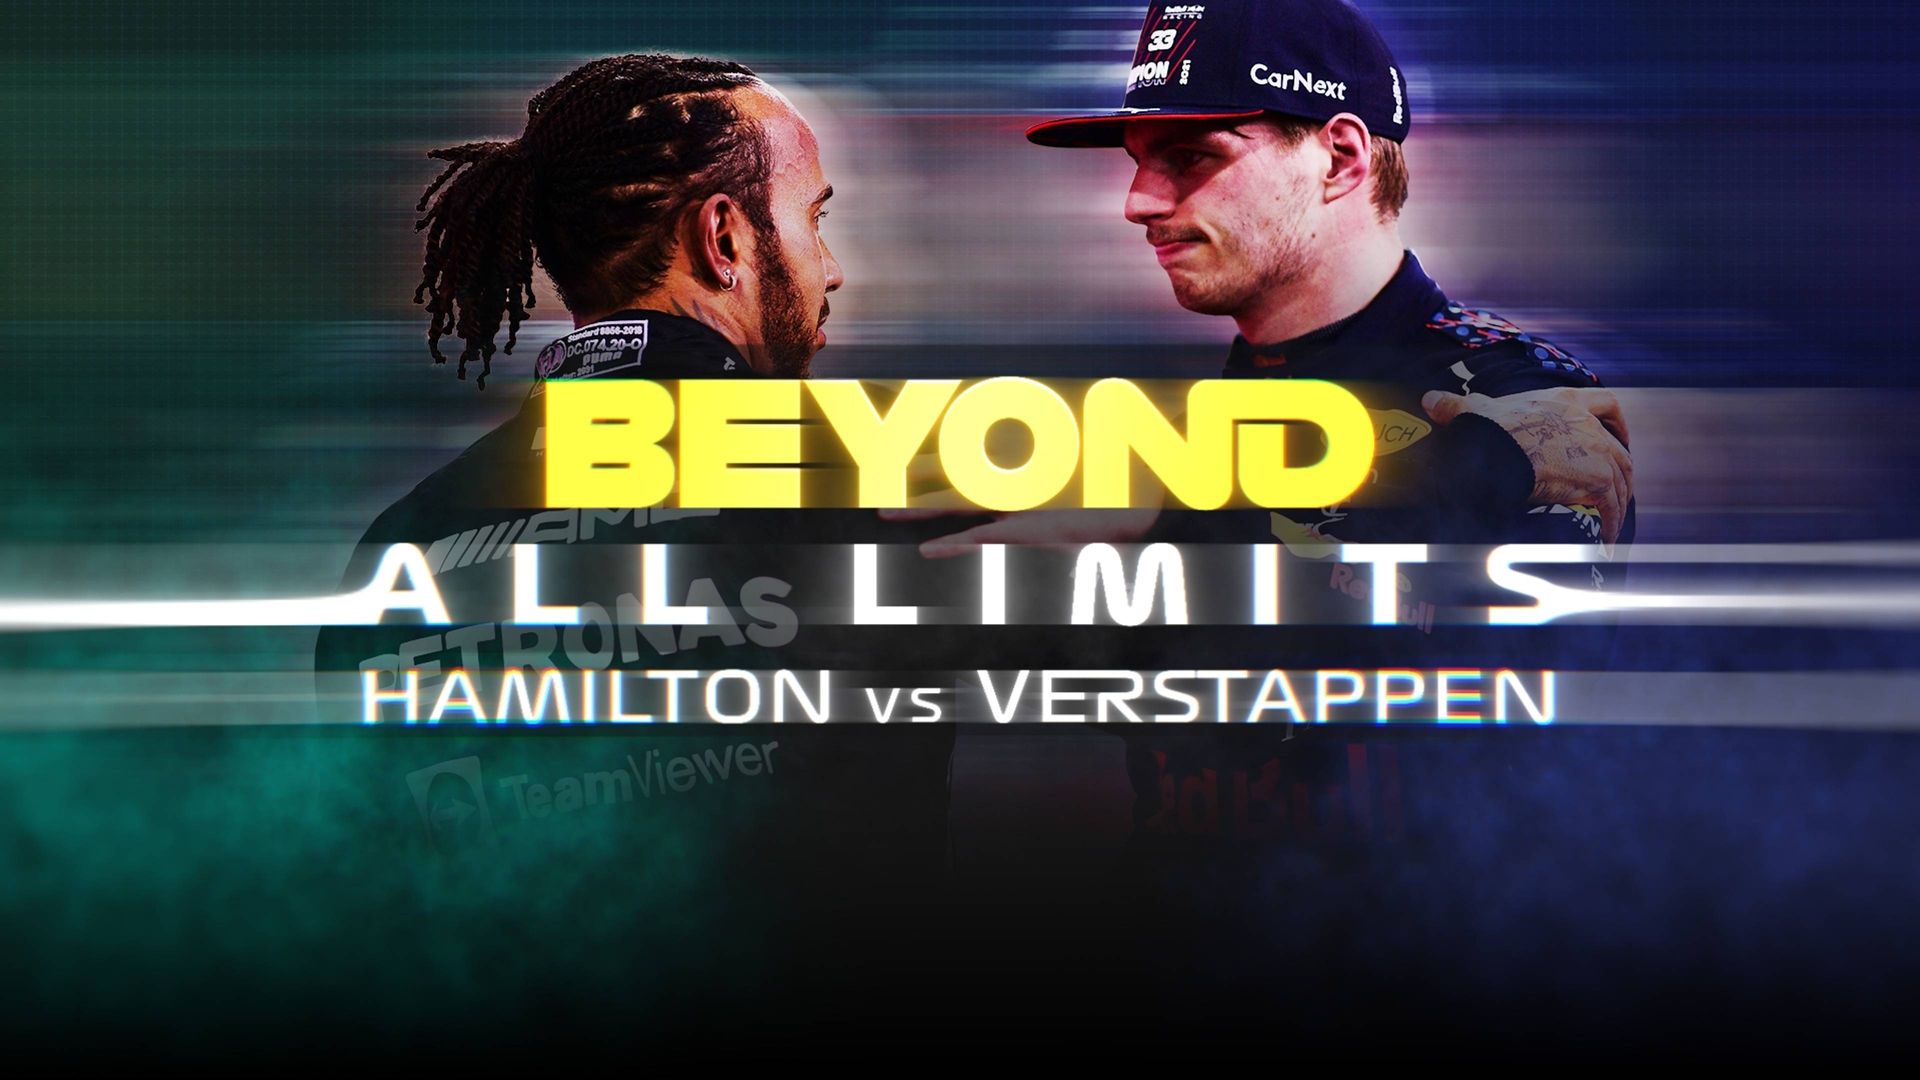 Beyond All Limits background